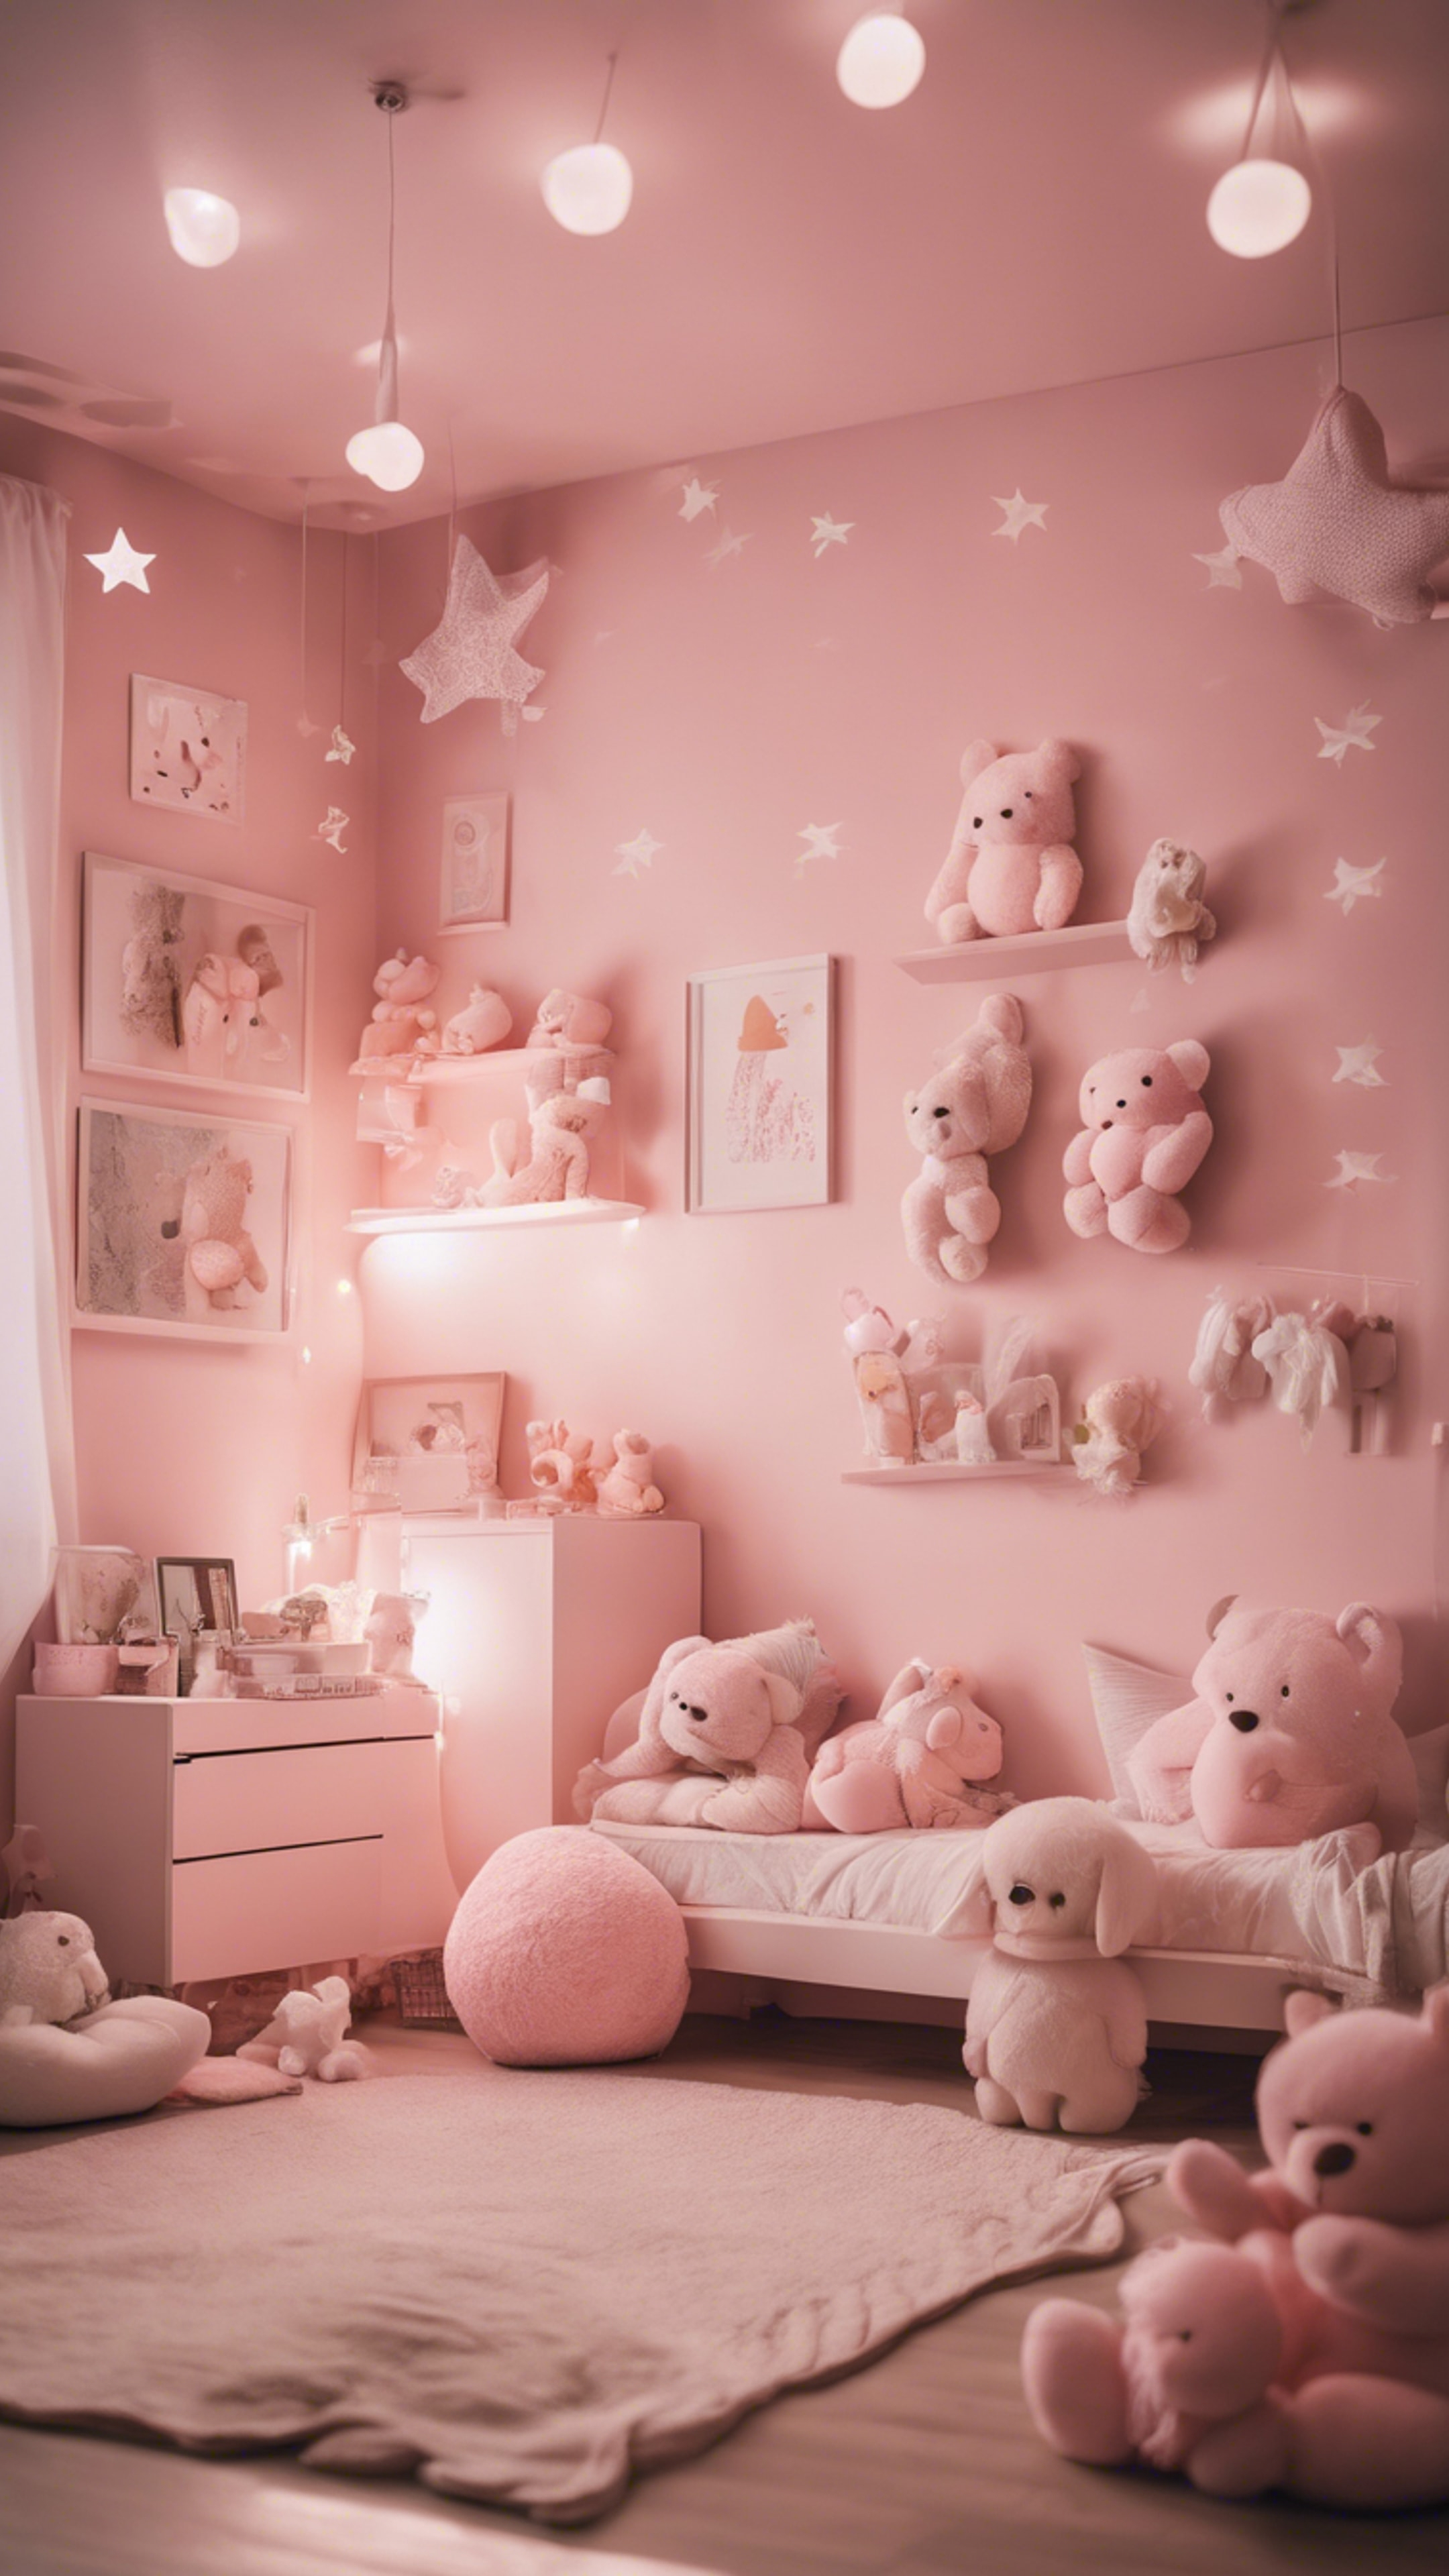 A child's bedroom designed in light pink Kawaii theme, with fluffy stuffed animals and stars.壁紙[1c682dae9a5849159ddf]